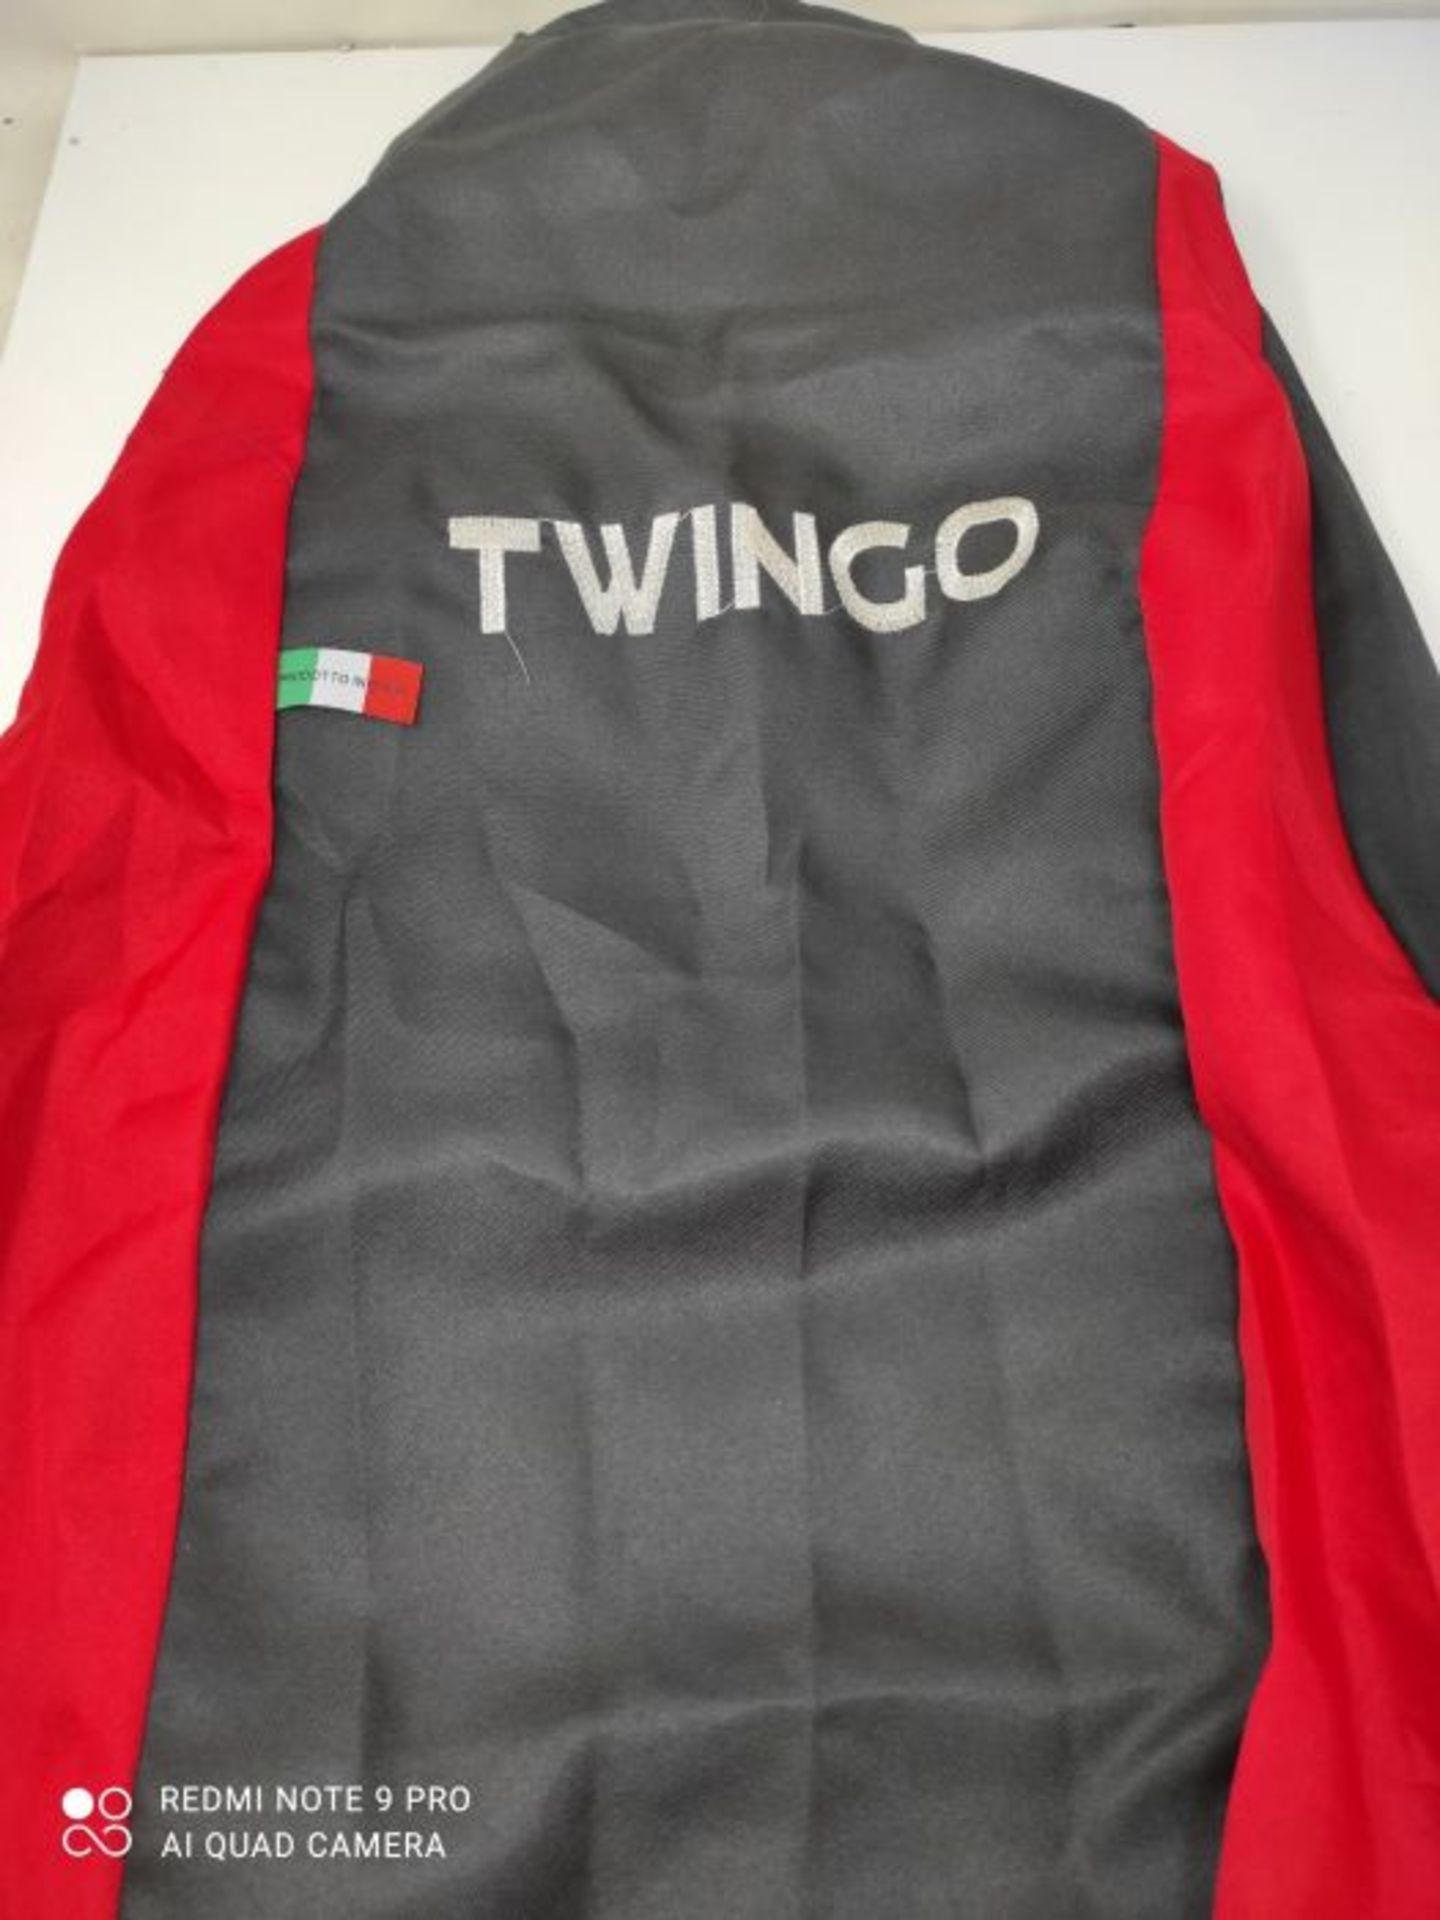 Lupex Shop Twingo N.R Seat Covers Black/Red - Image 3 of 4